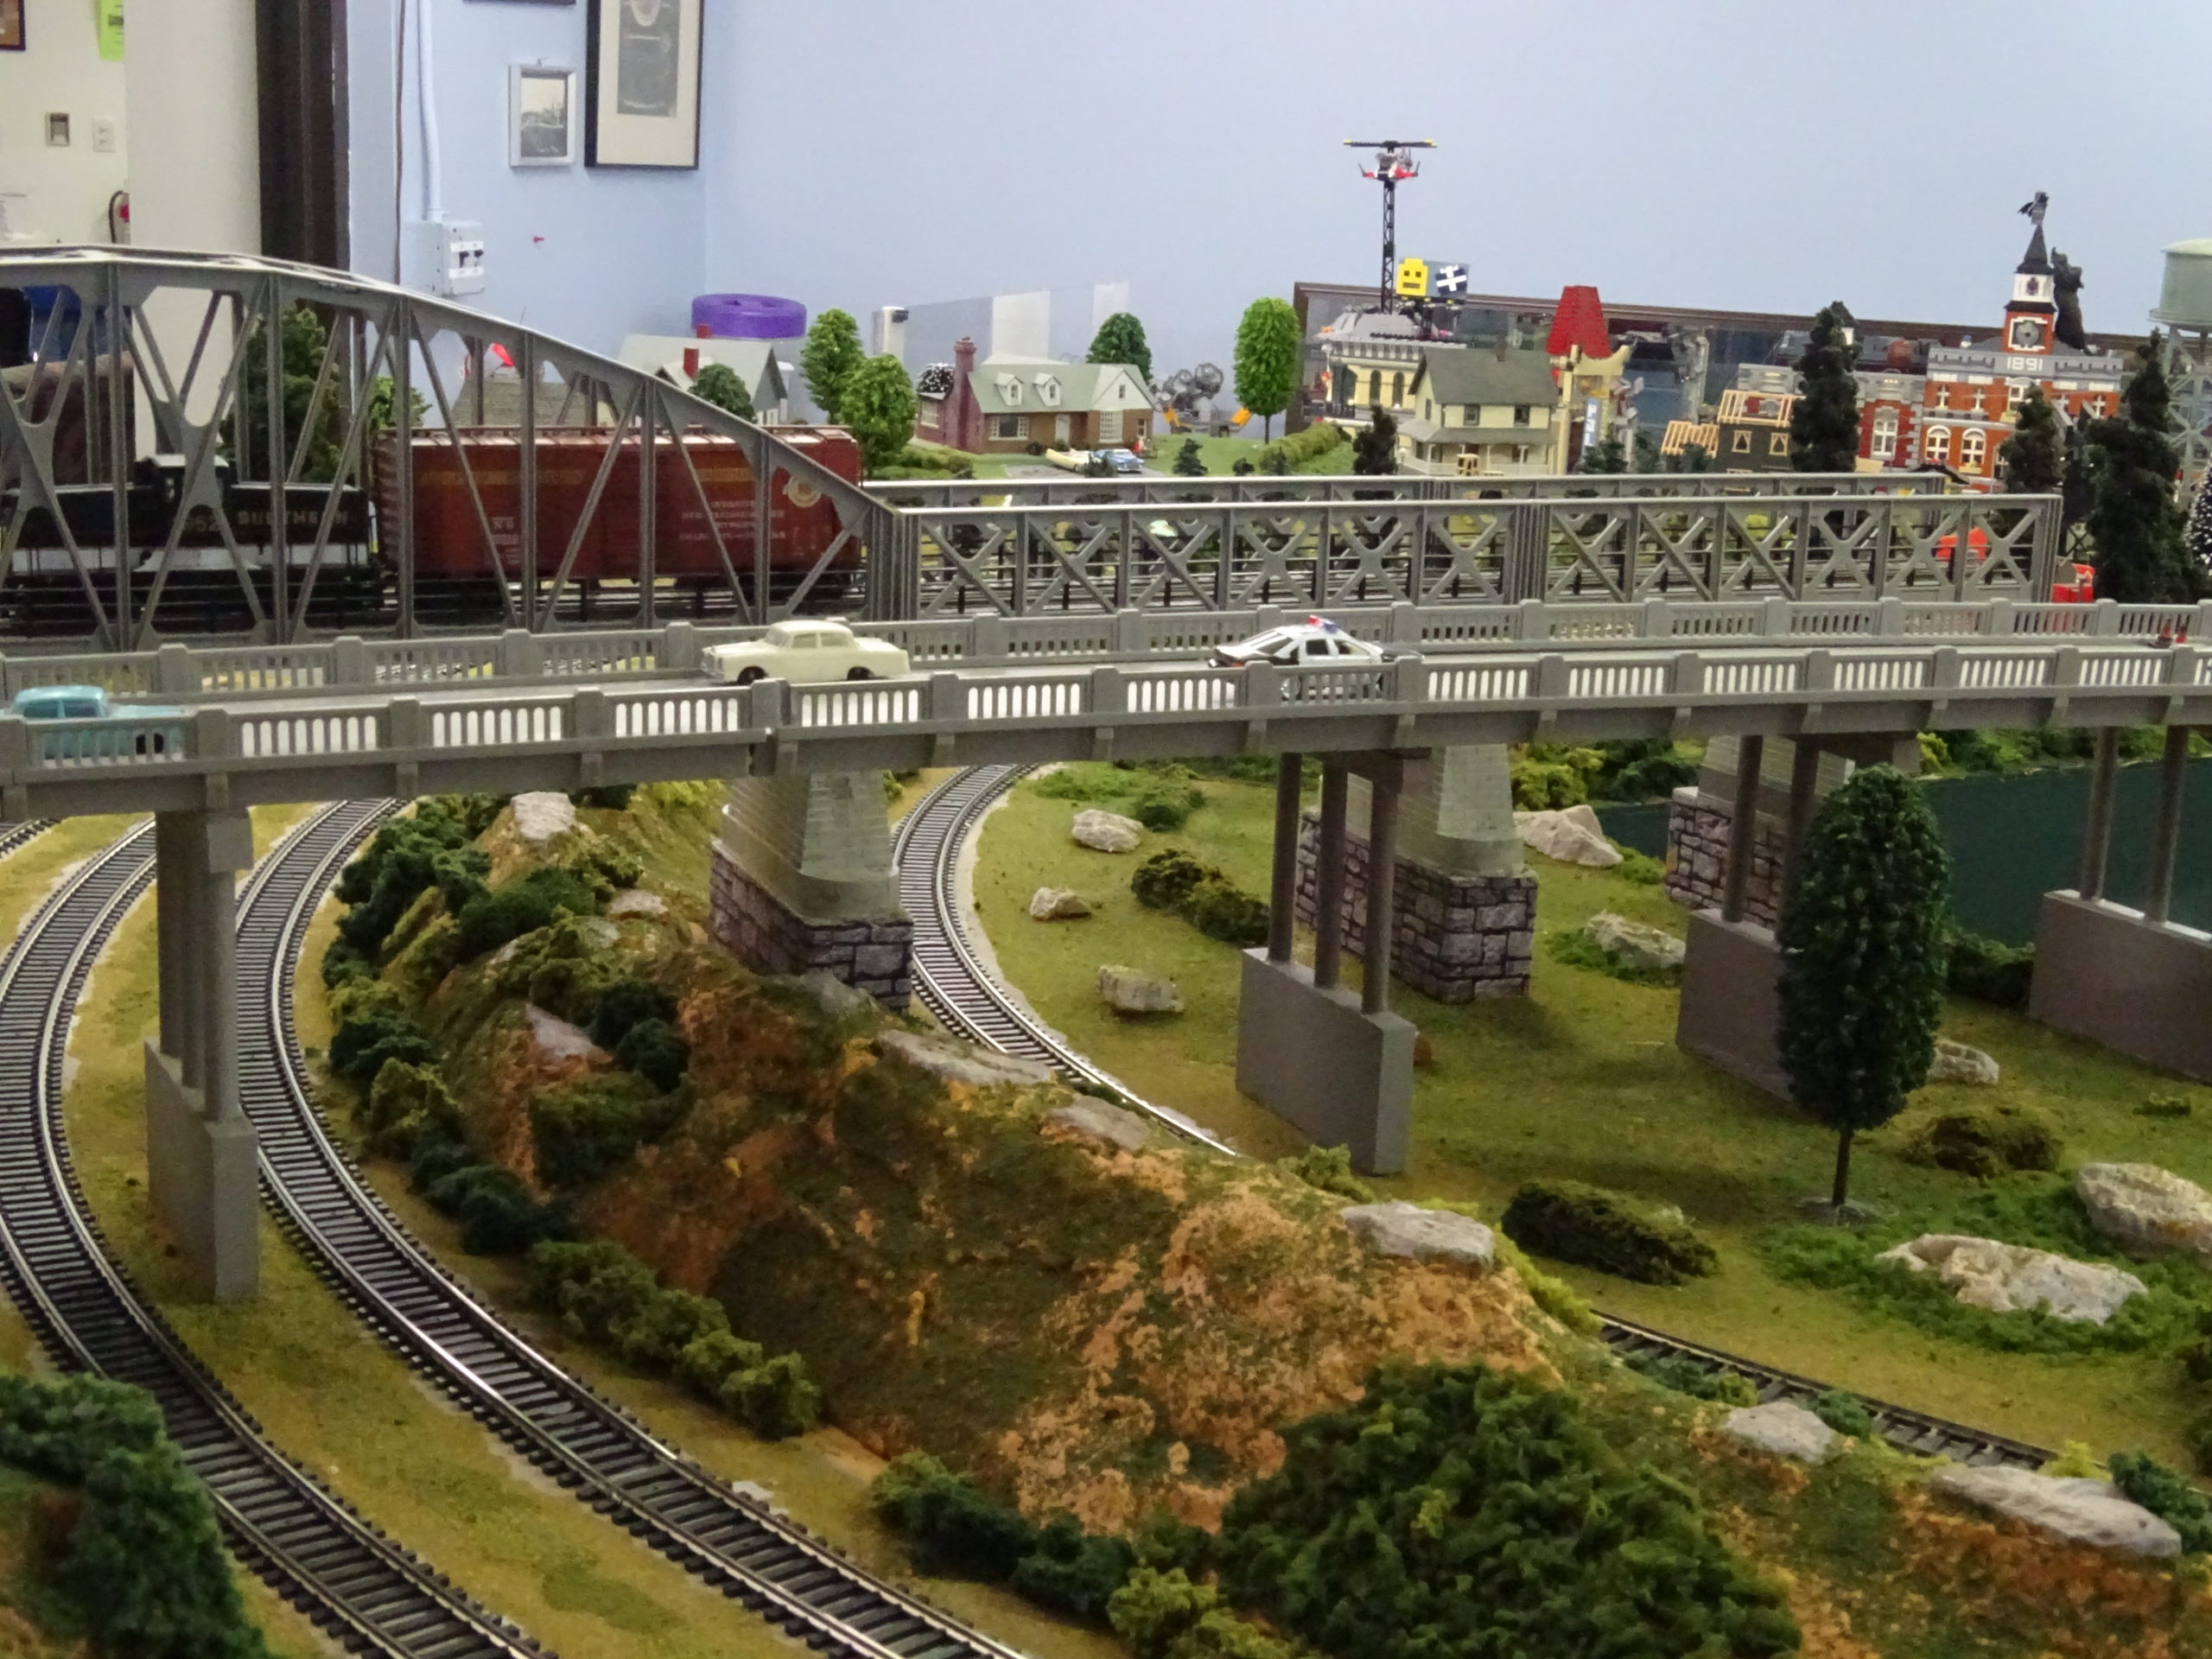 Neuse River Valley Model Railroad Club Station